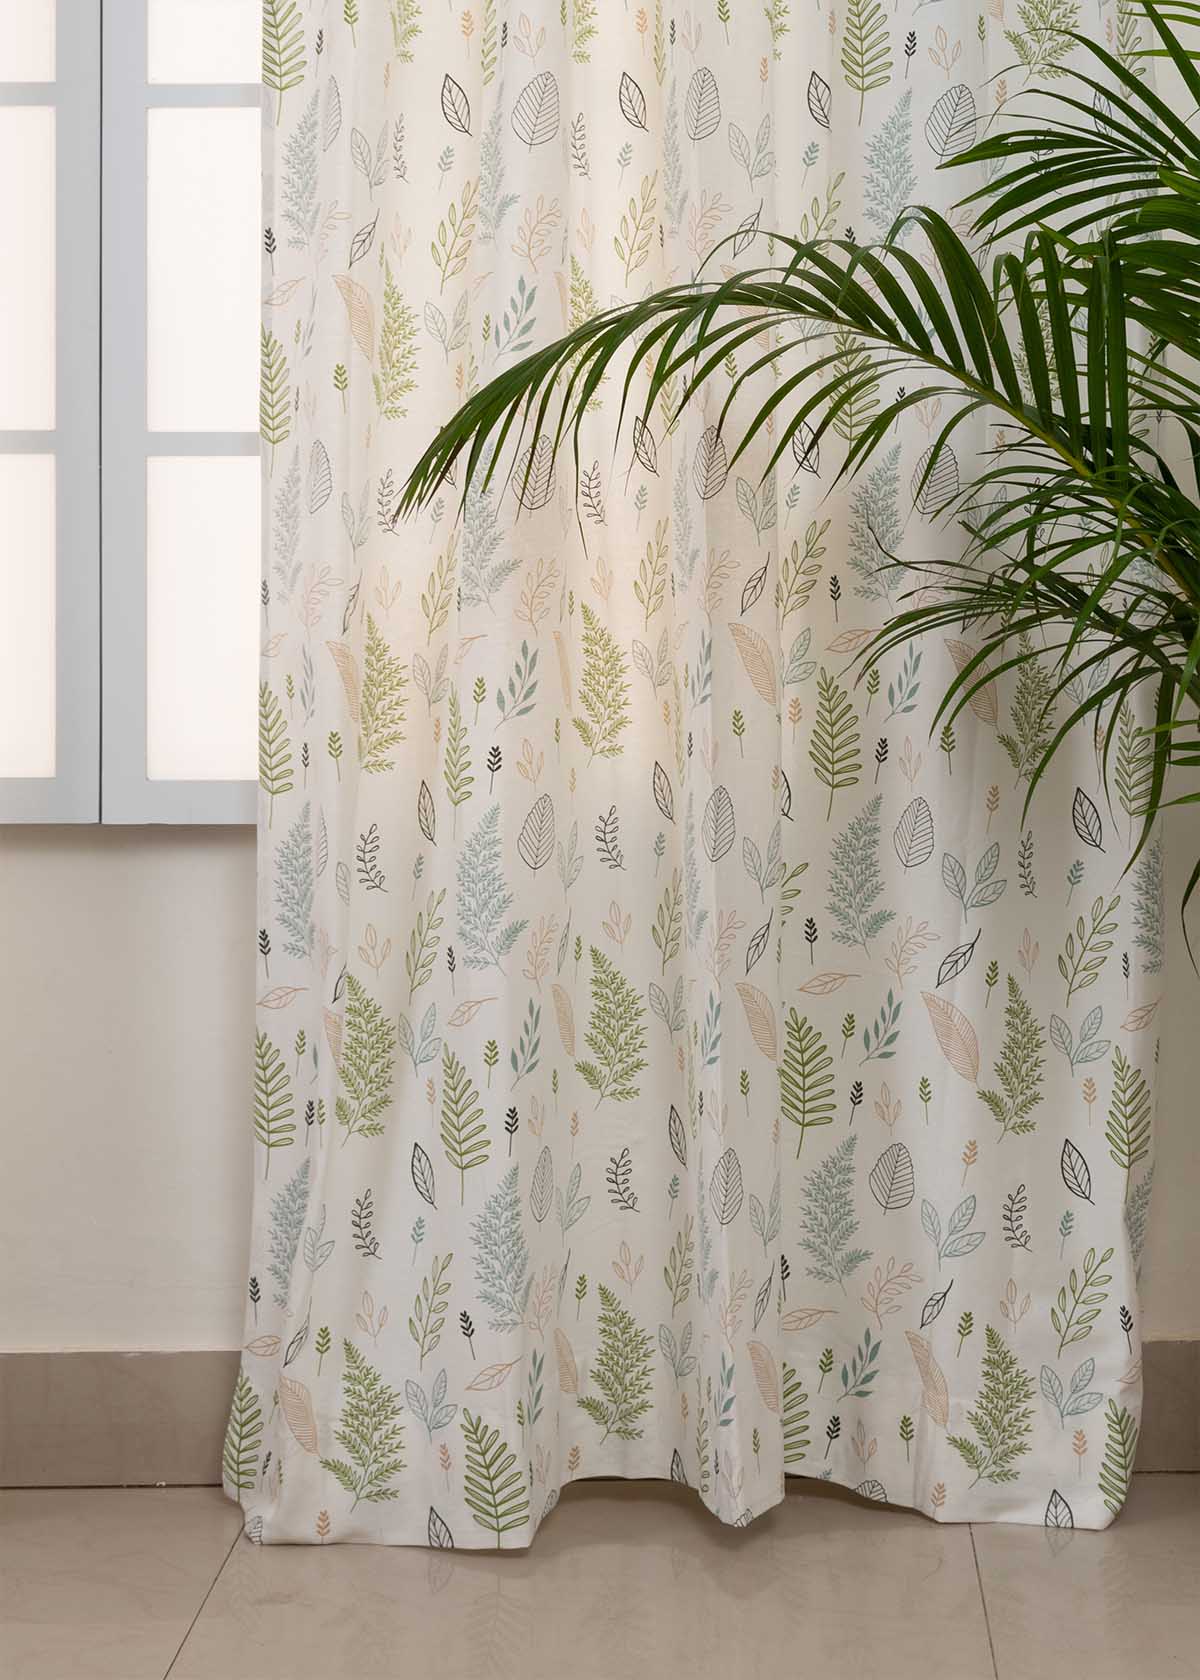 Rustling Leaves 100% cotton floral curtain for bed room - Room darkening - Green - Pack of 1